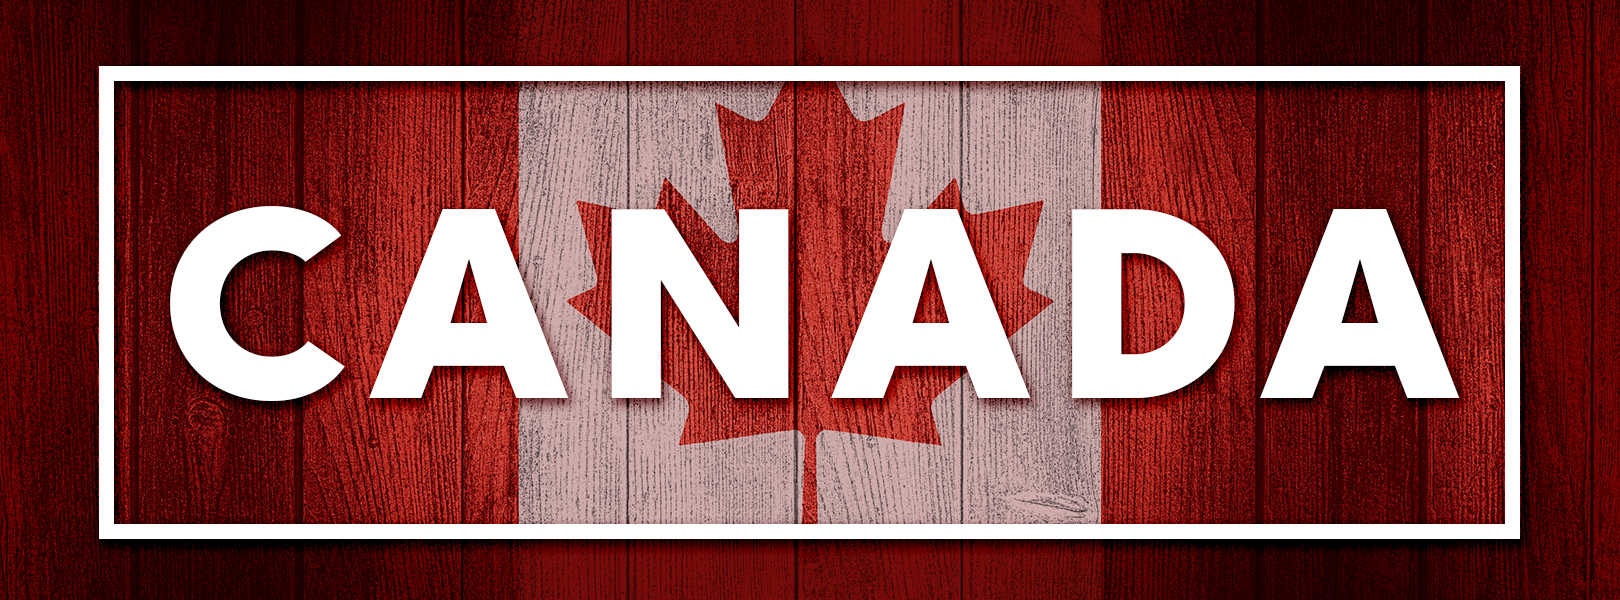 10x’ing your conversion rate with Canadian Buyers